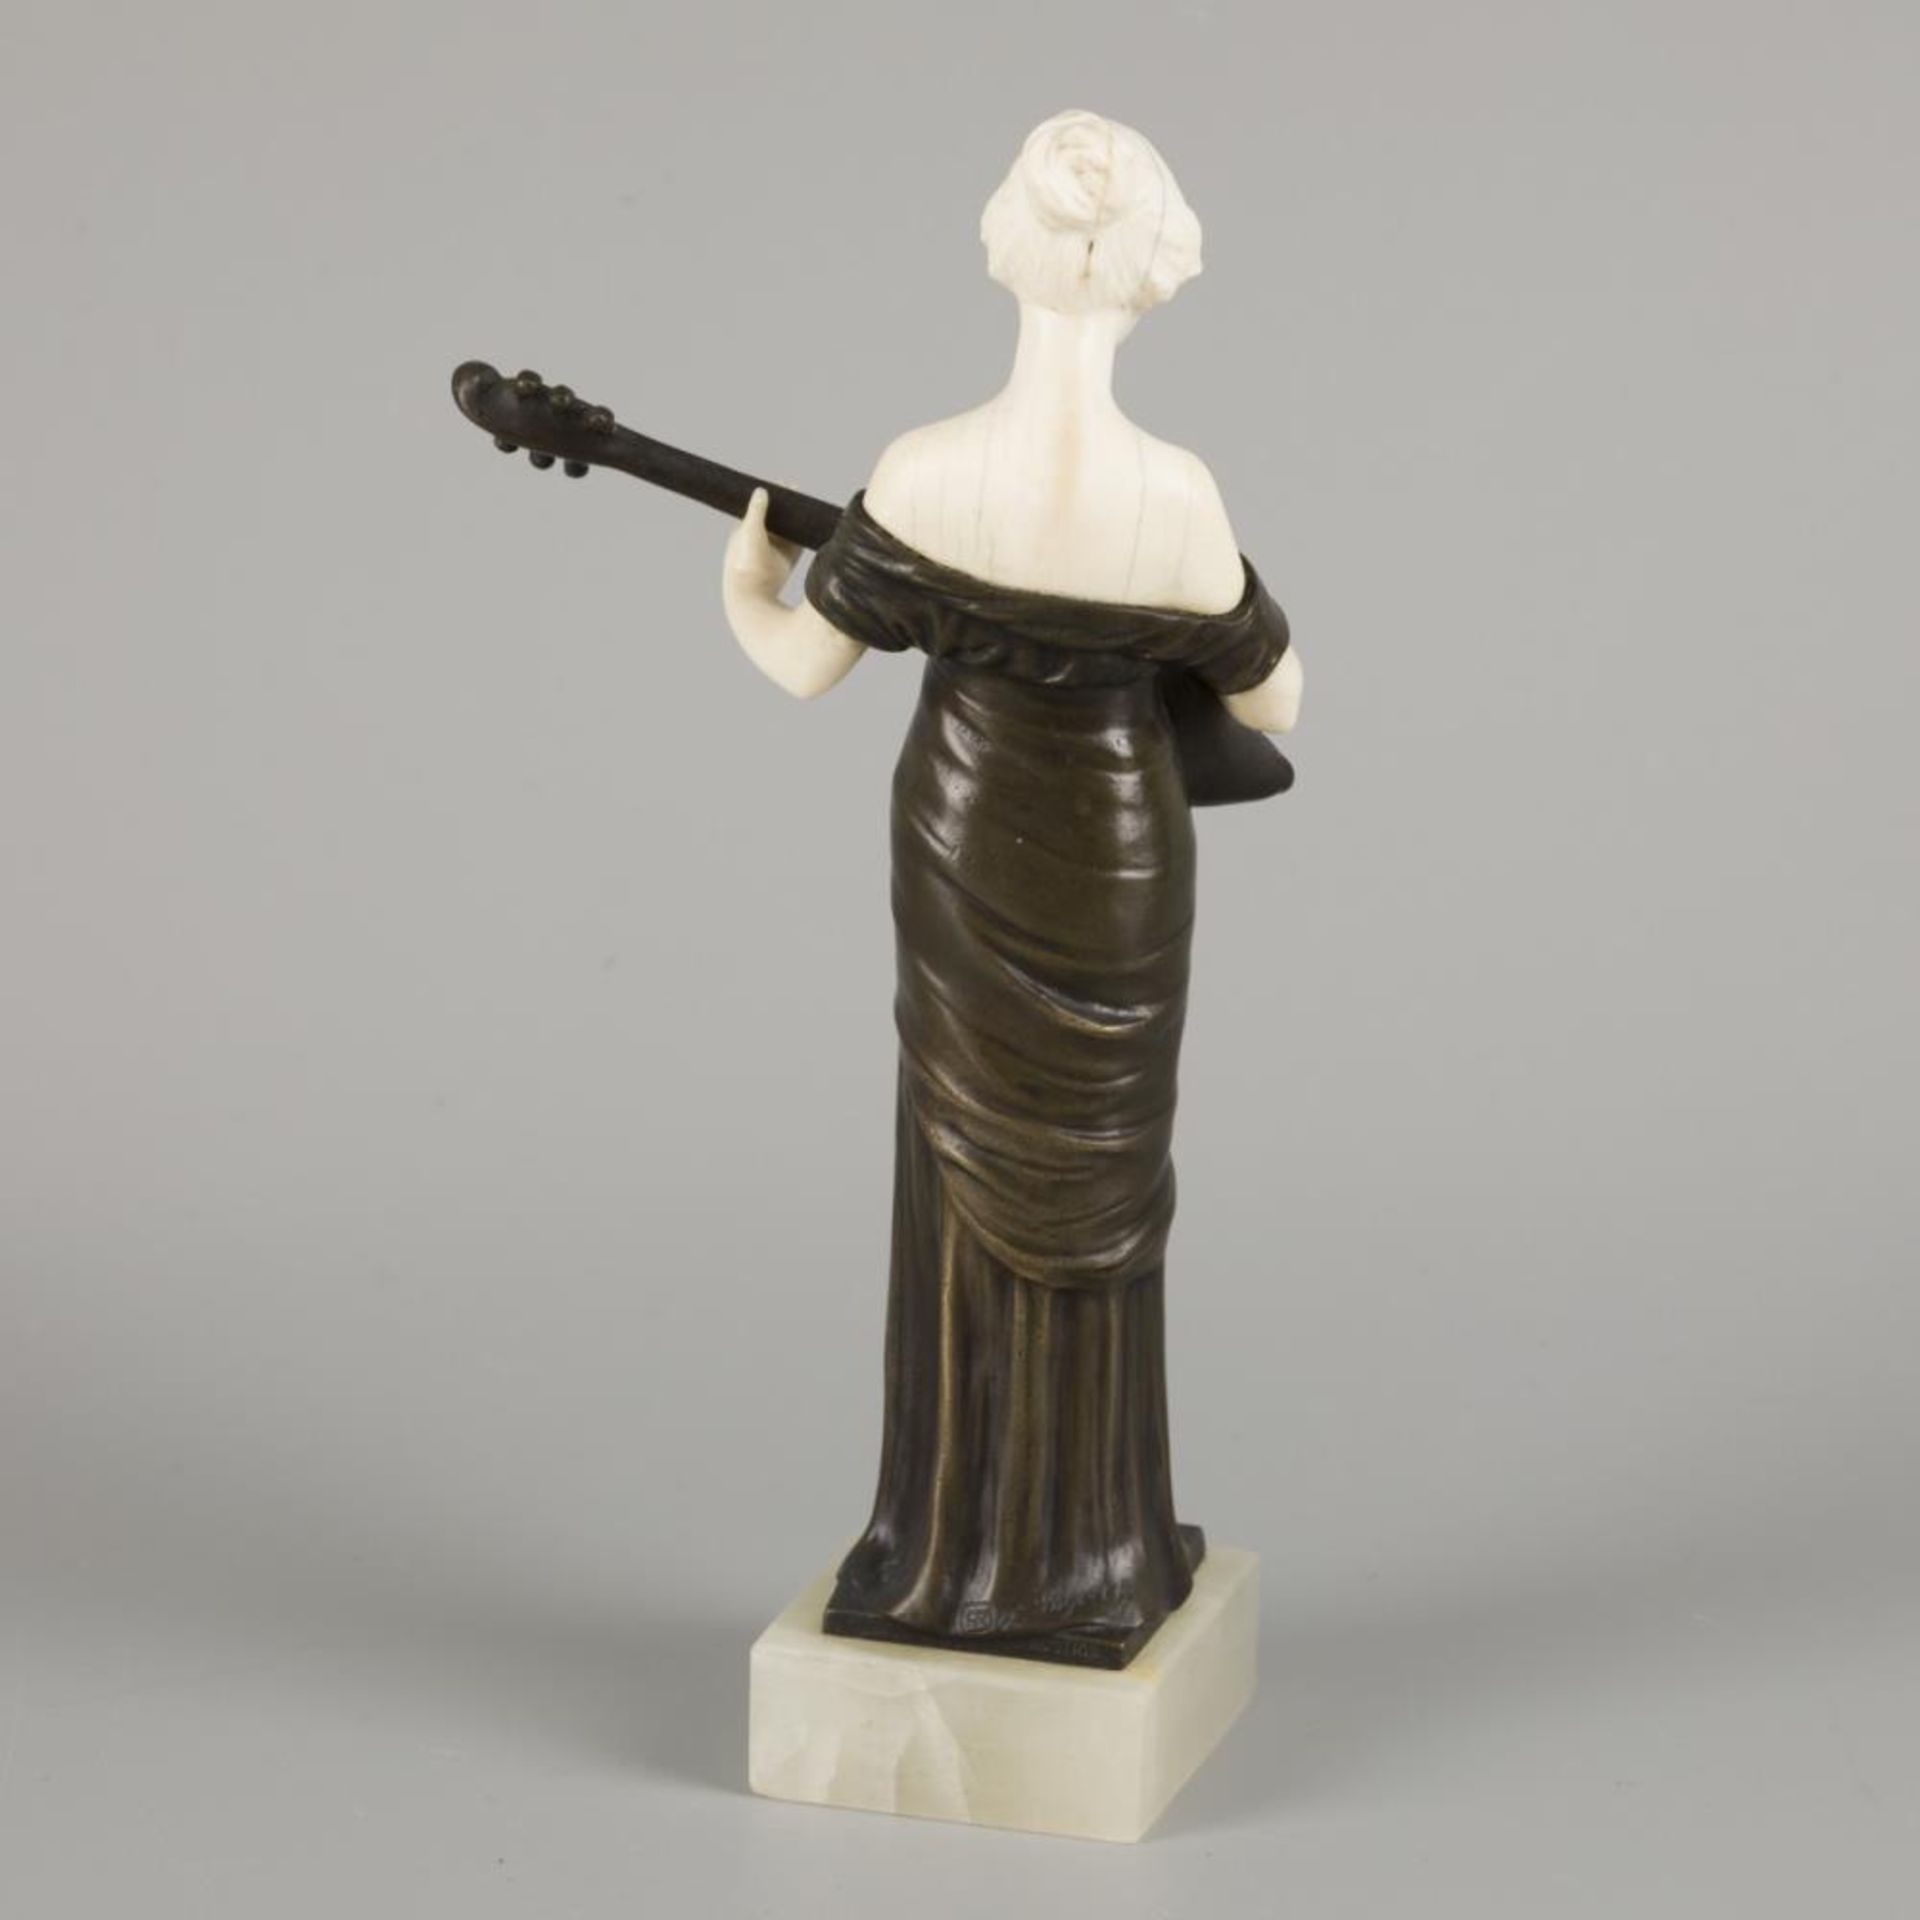 Ferdinand Lugerth (1885 - 1915), a bronze statuette of a guitar playing lady, Austria, ca. 1900. - Image 3 of 4